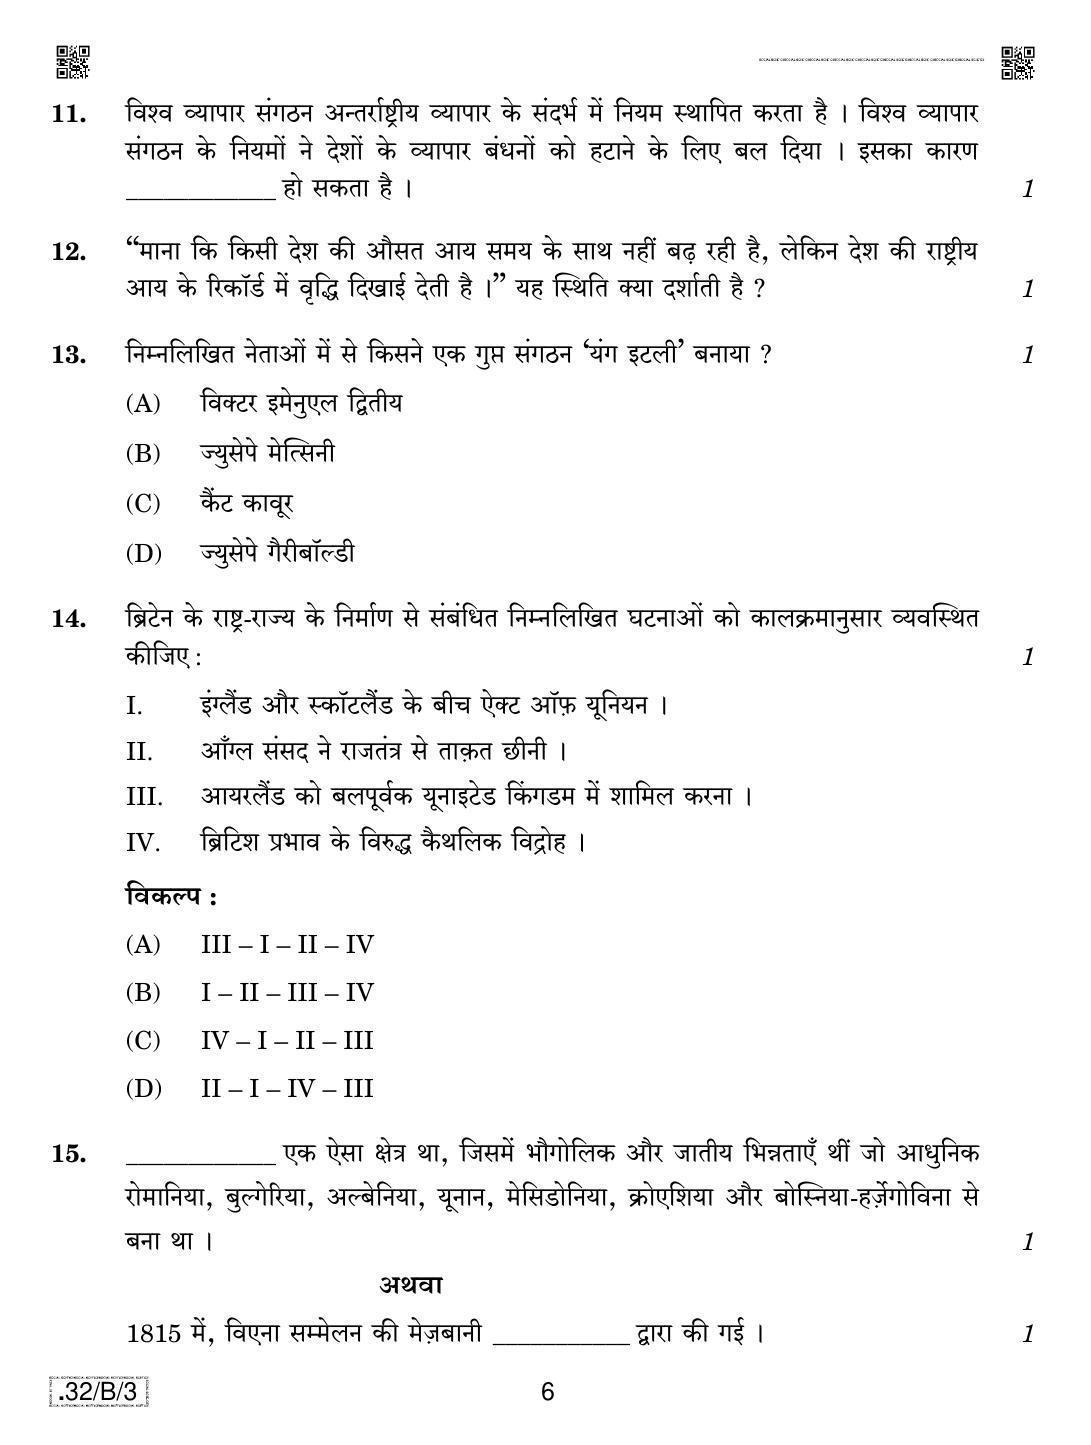 CBSE Class 10 32-C-3 Social Science 2020 Compartment Question Paper - Page 6